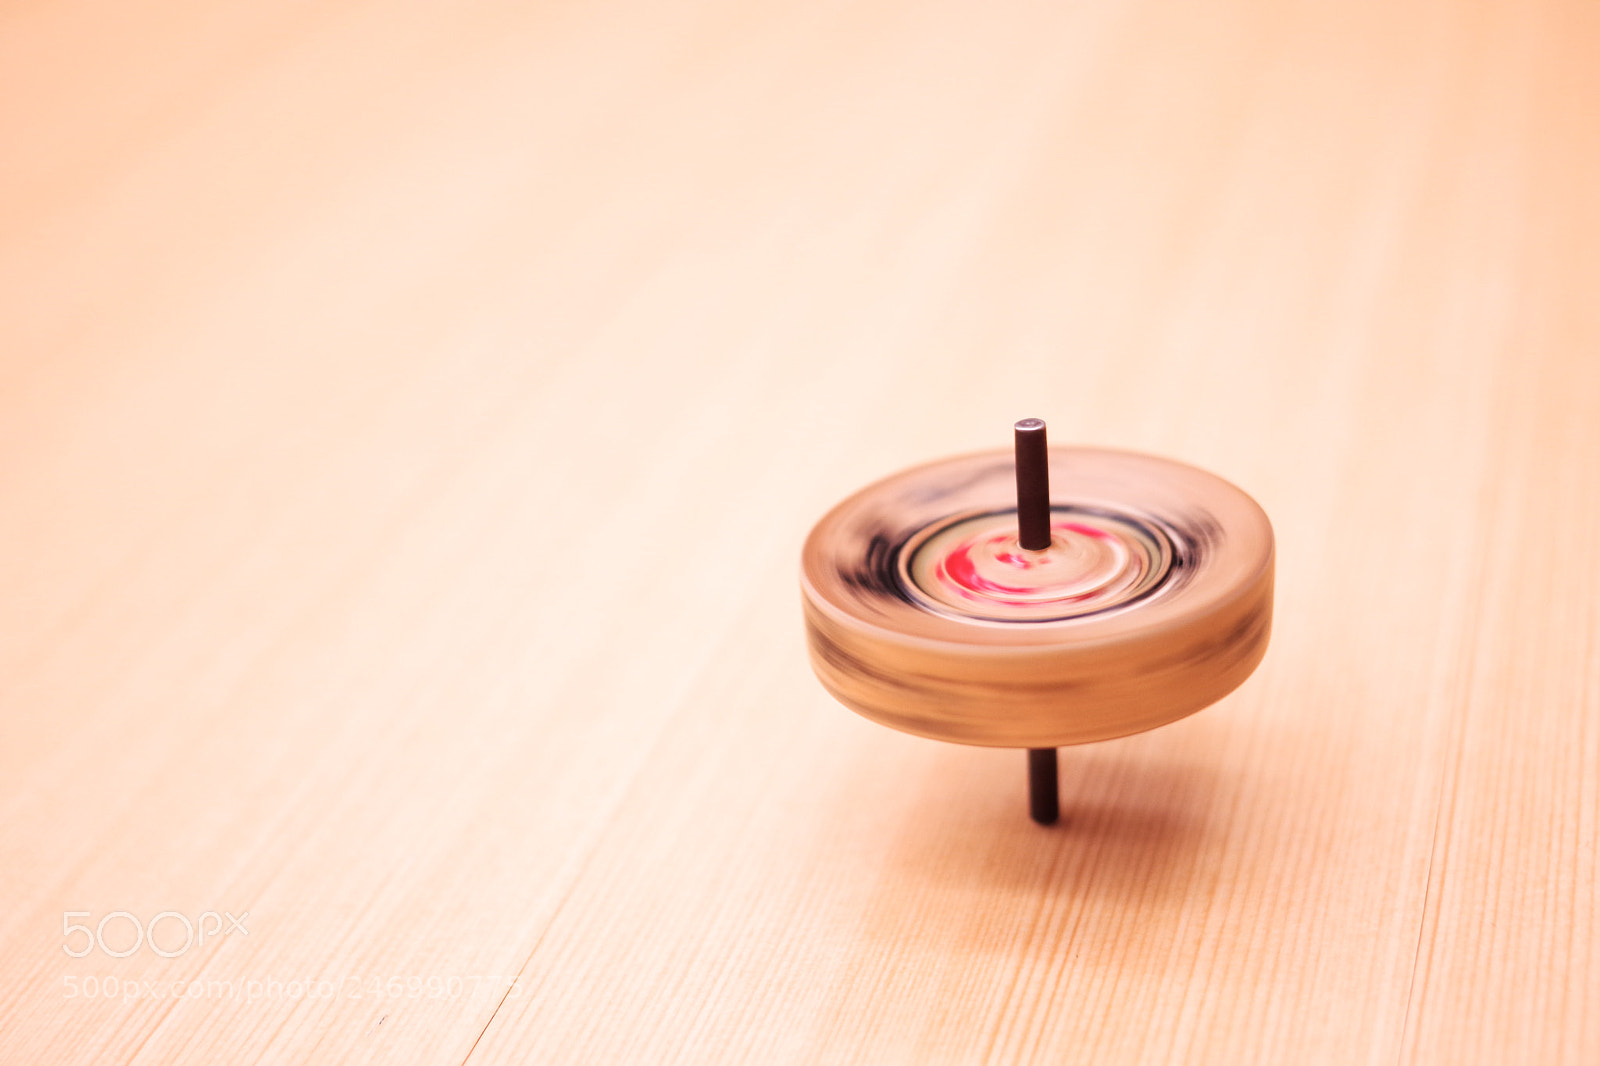 Pentax K-70 sample photo. A spinning top photography